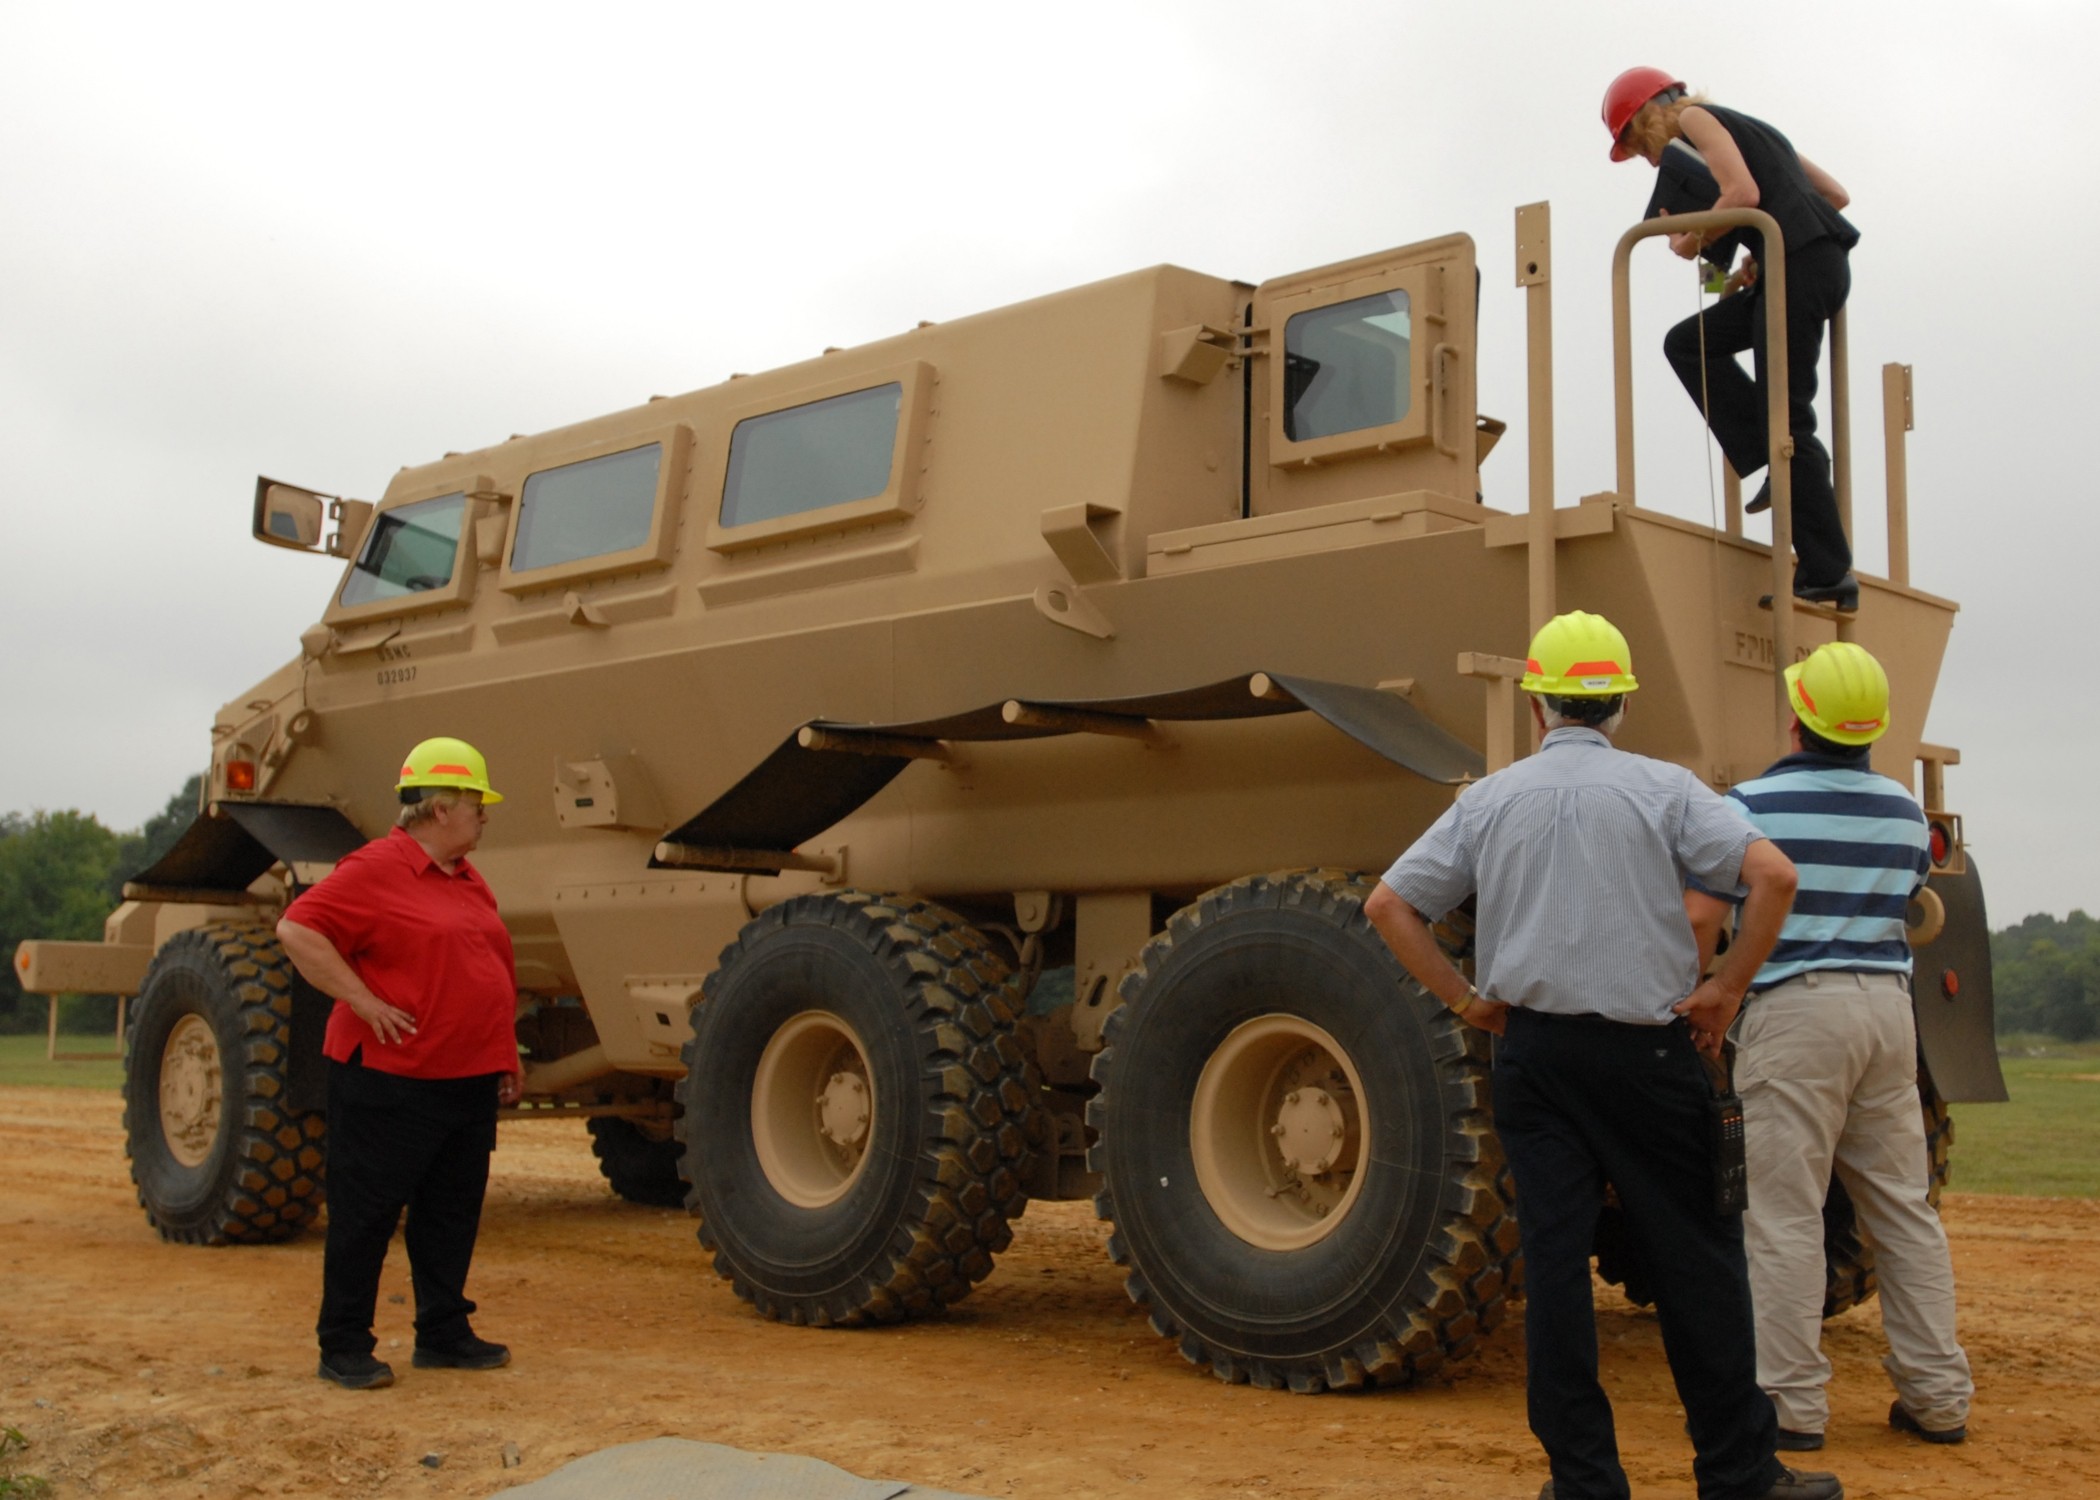 Mraps Displayed On Aberdeen Proving Ground | Article | The United States  Army